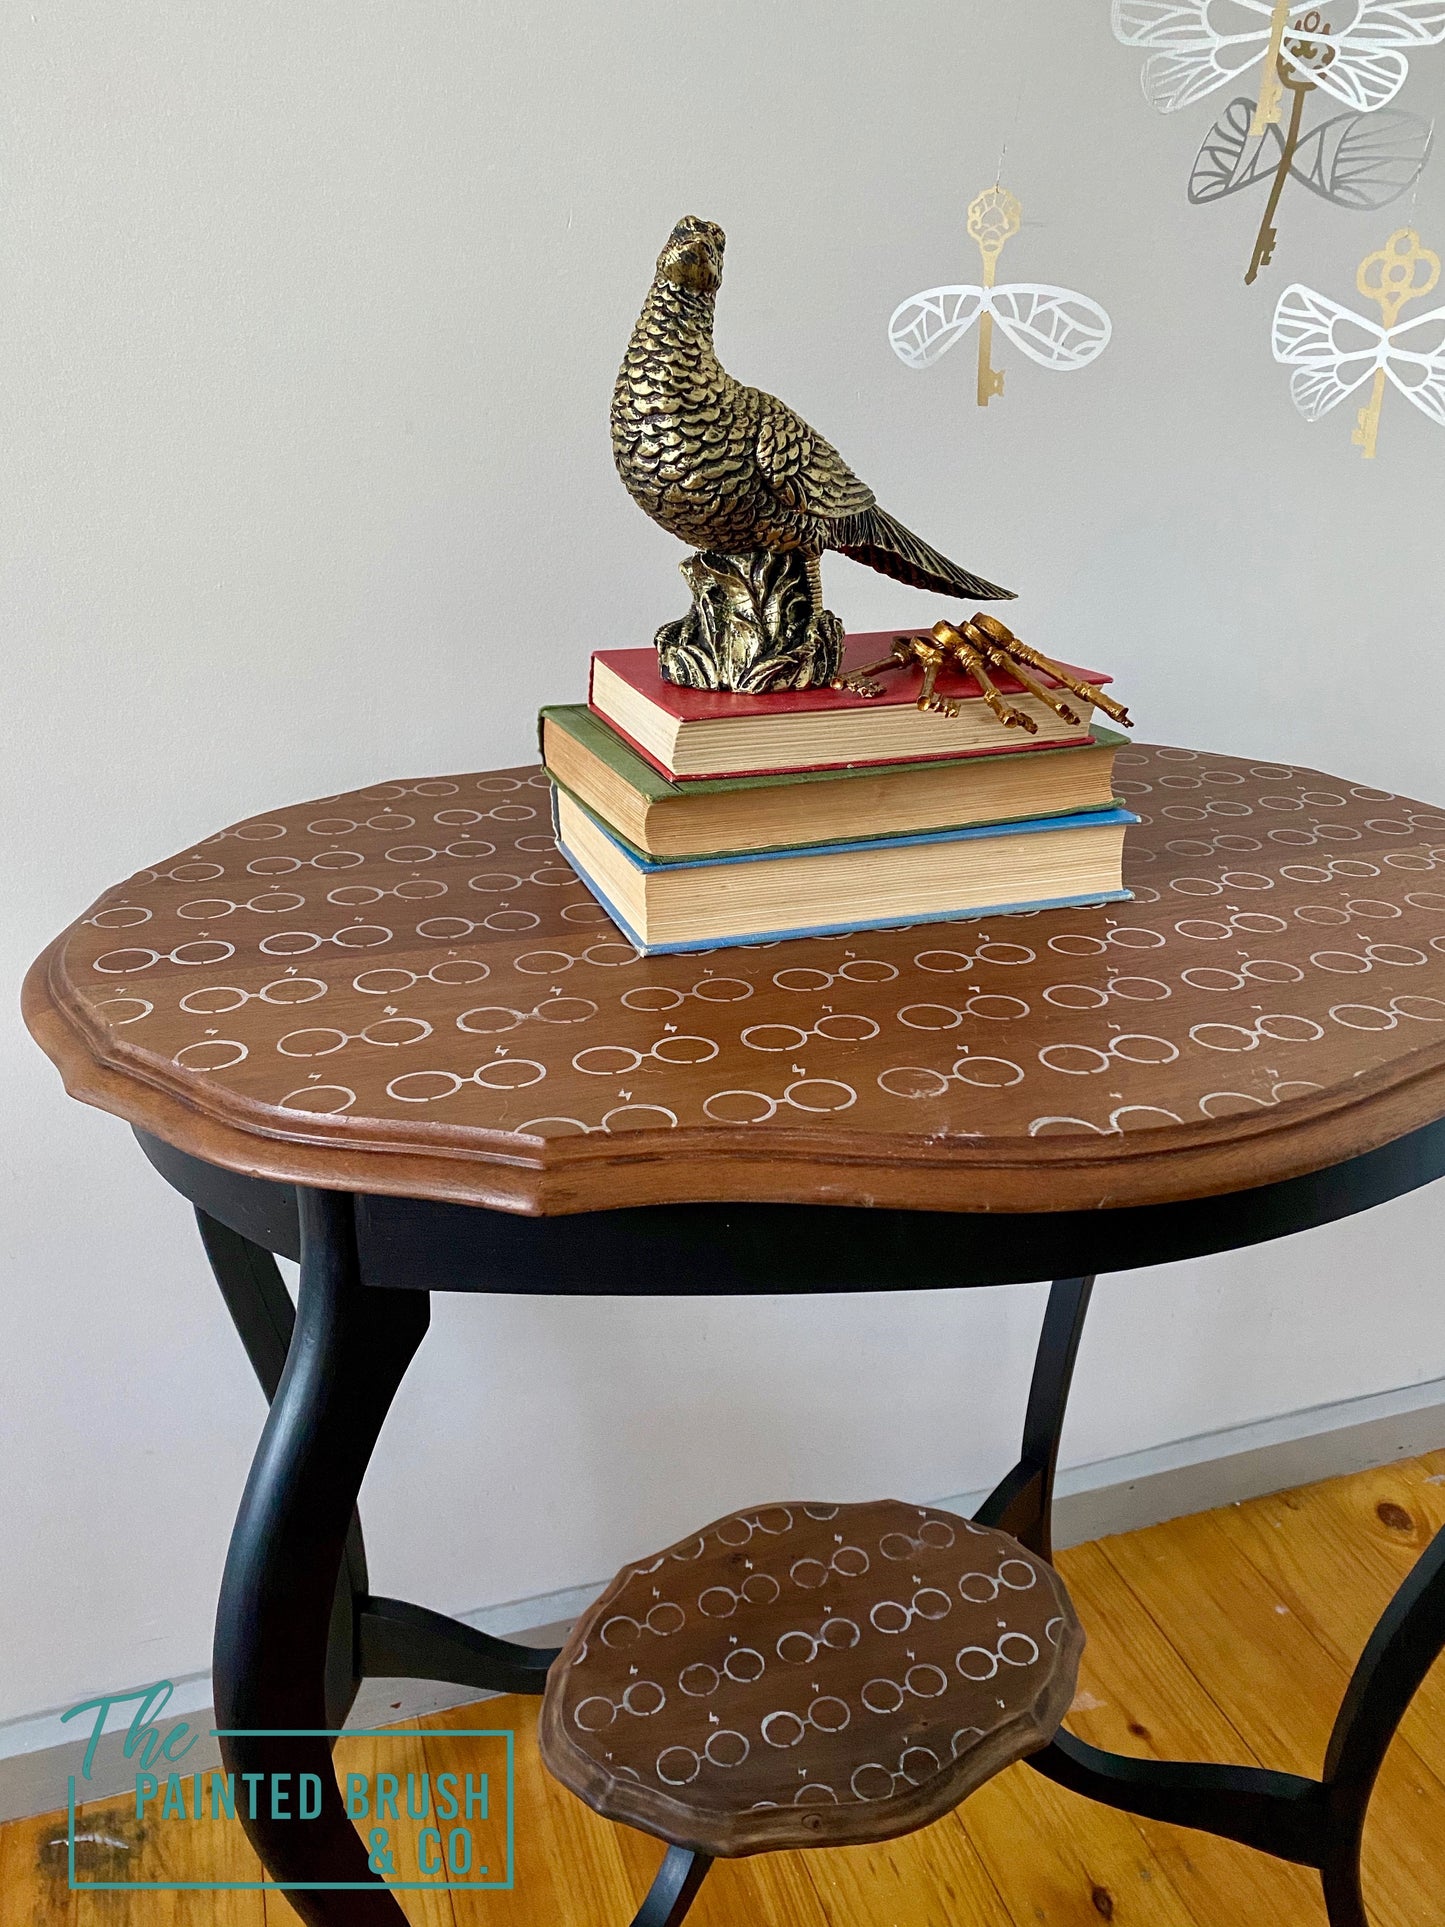 The Boy Who Lived End Table